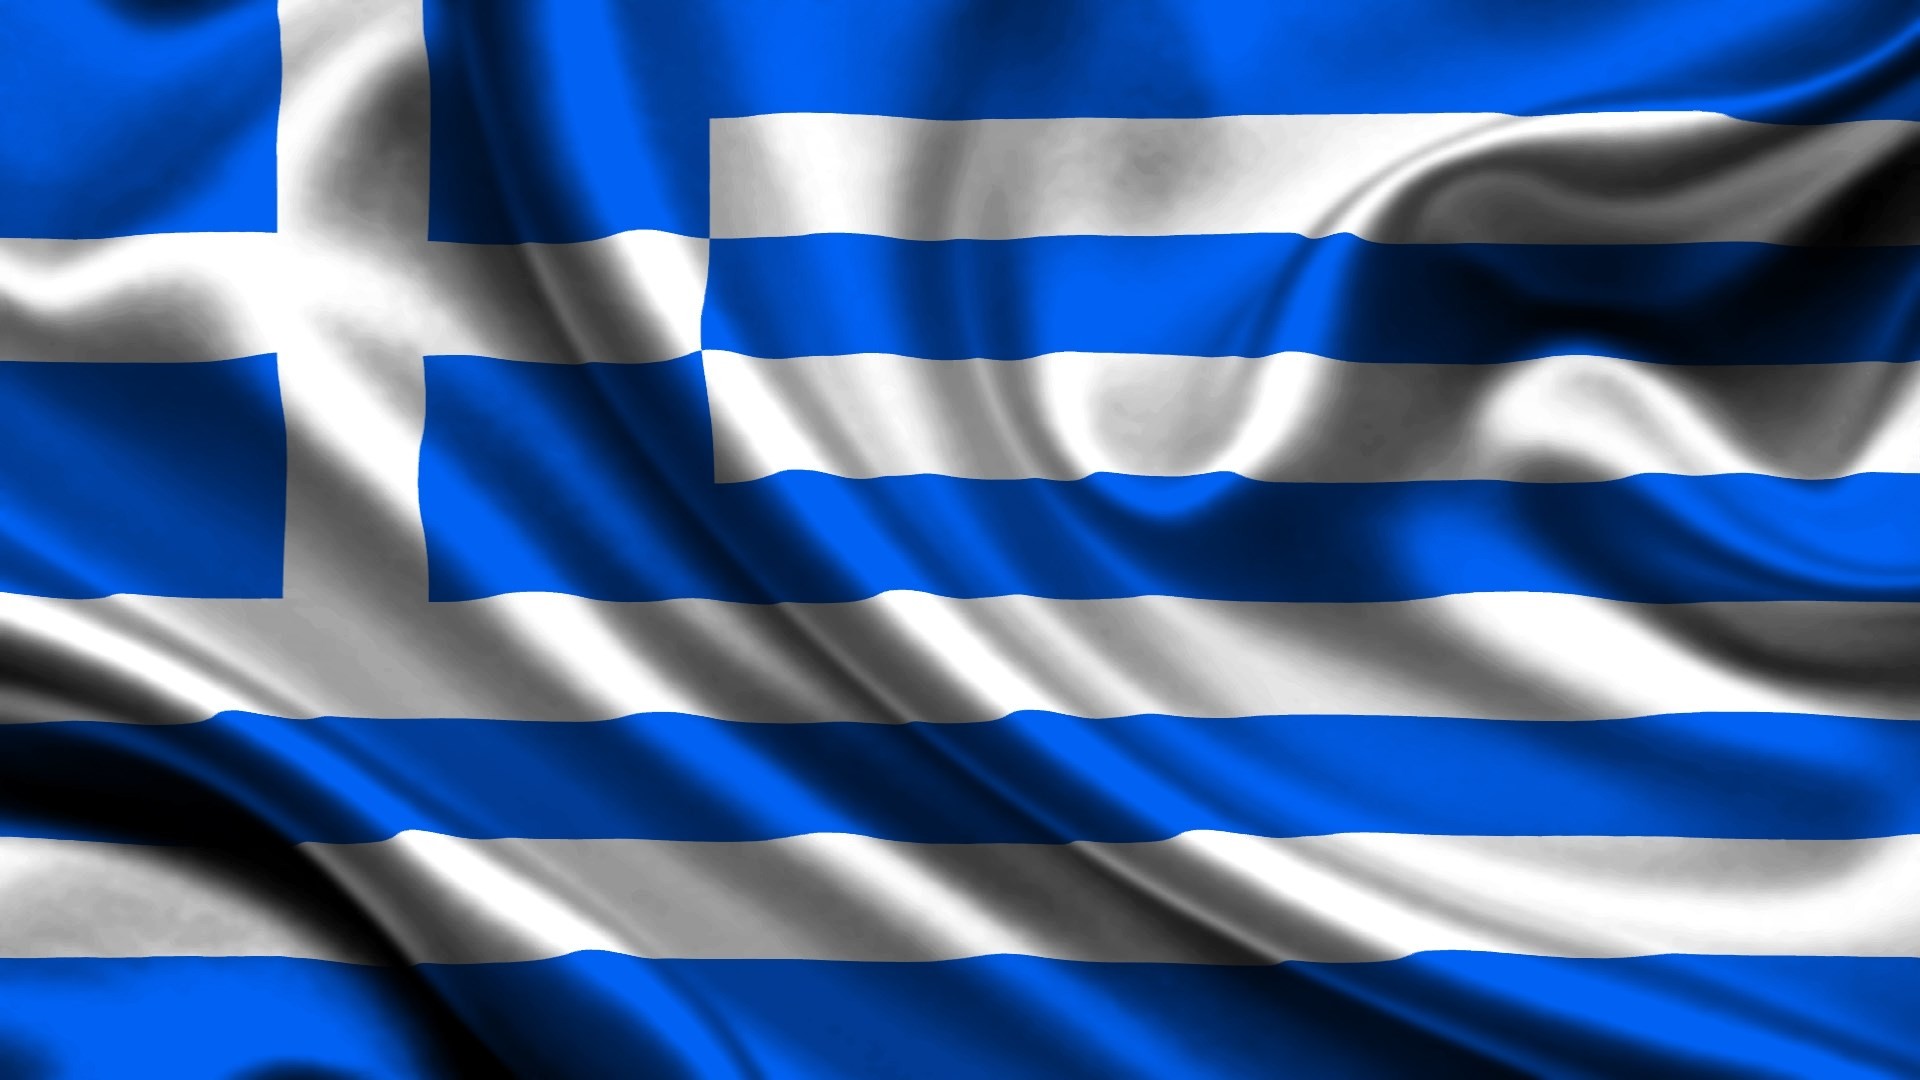 1920x1080 Greece Flag Wallpapers Android Apps on Google Play | HD Wallpapers |  Pinterest | Wallpapers android, Android apps and Google play